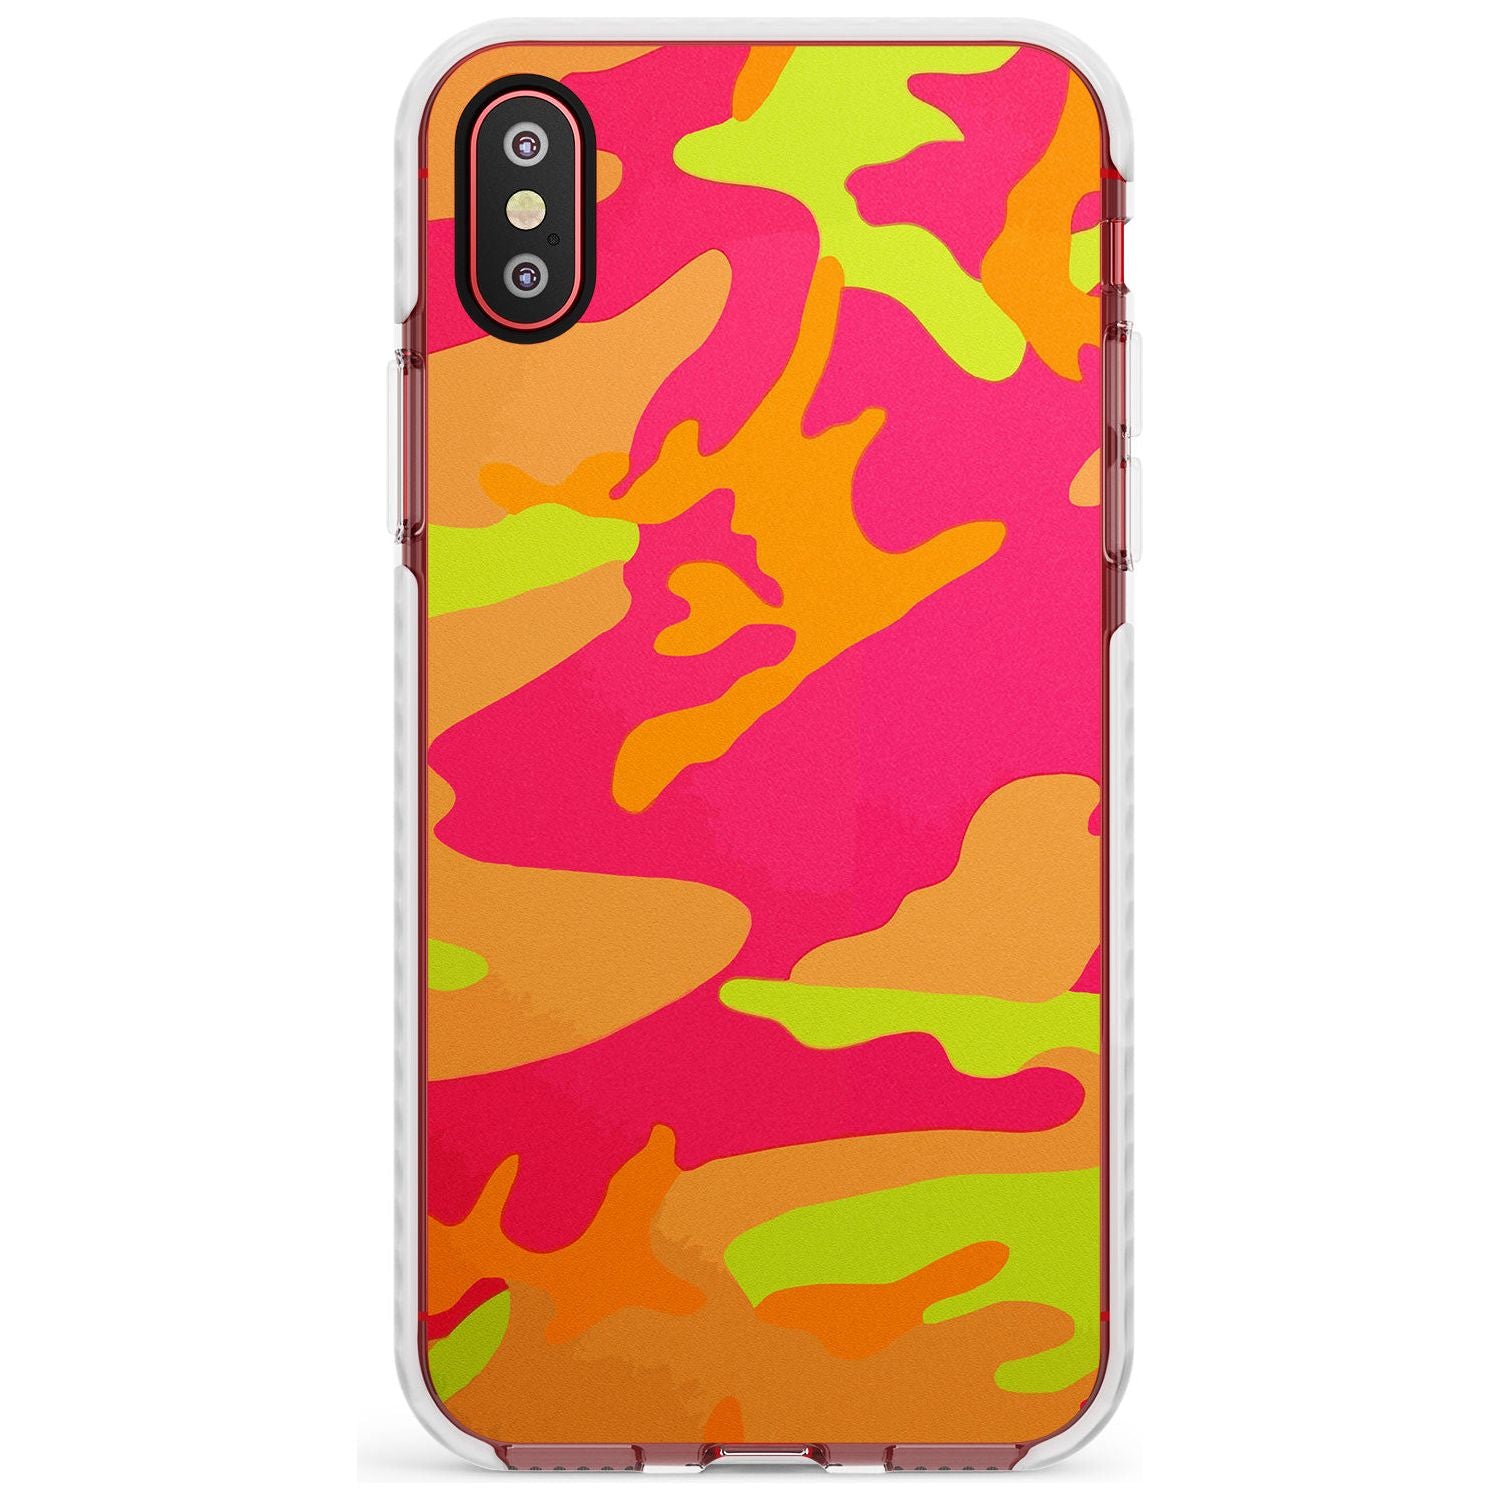 Neon Camo Impact Phone Case for iPhone X XS Max XR